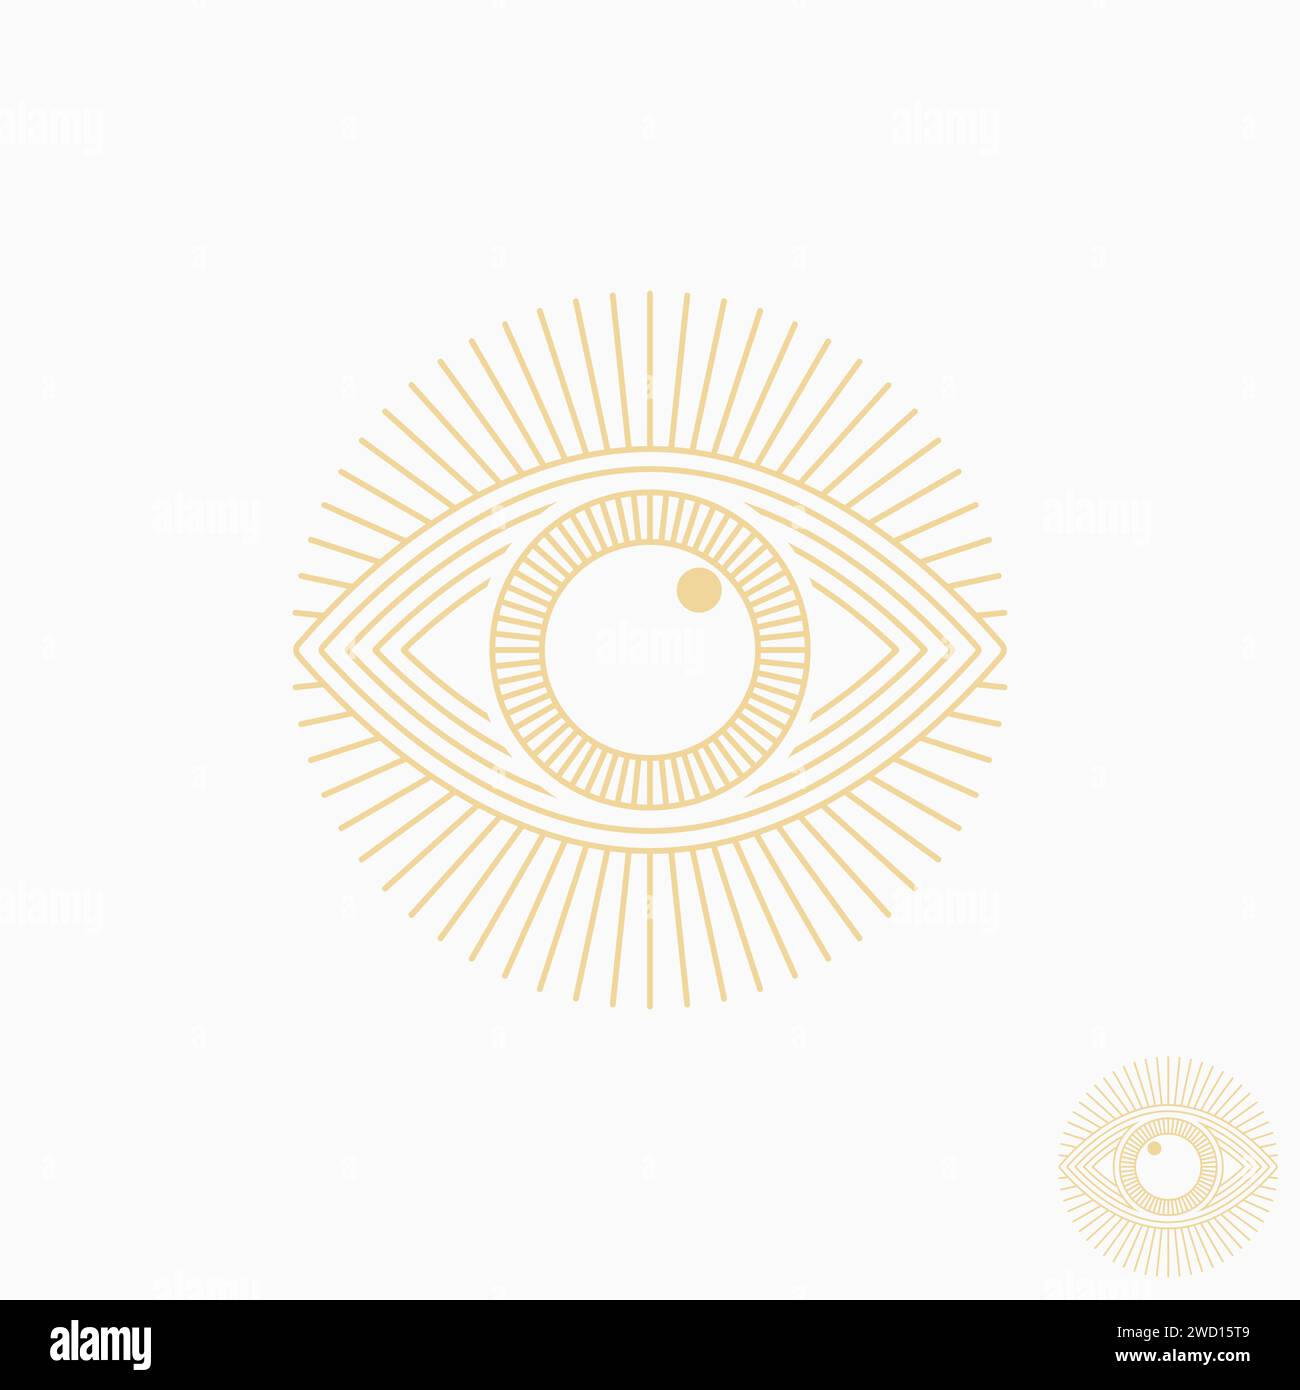 Logo design graphic concept creative premium vector stock abstract unique line out art eye faith like sun. Related to classic ancient symbol painting Stock Vector